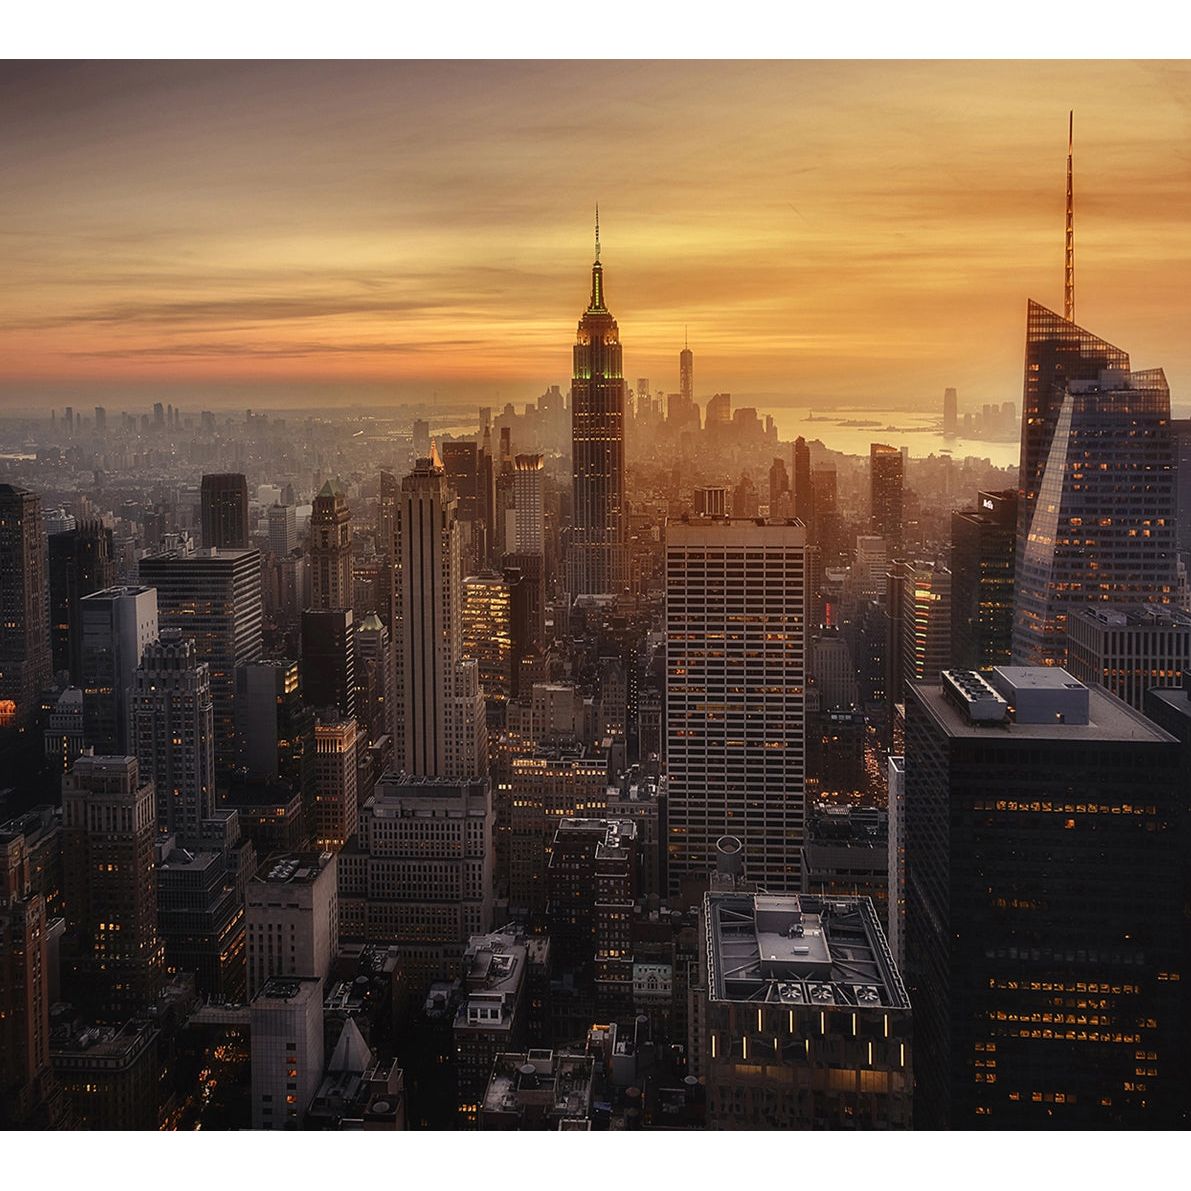 Sunset Serenity: Cityscape Wall Mural